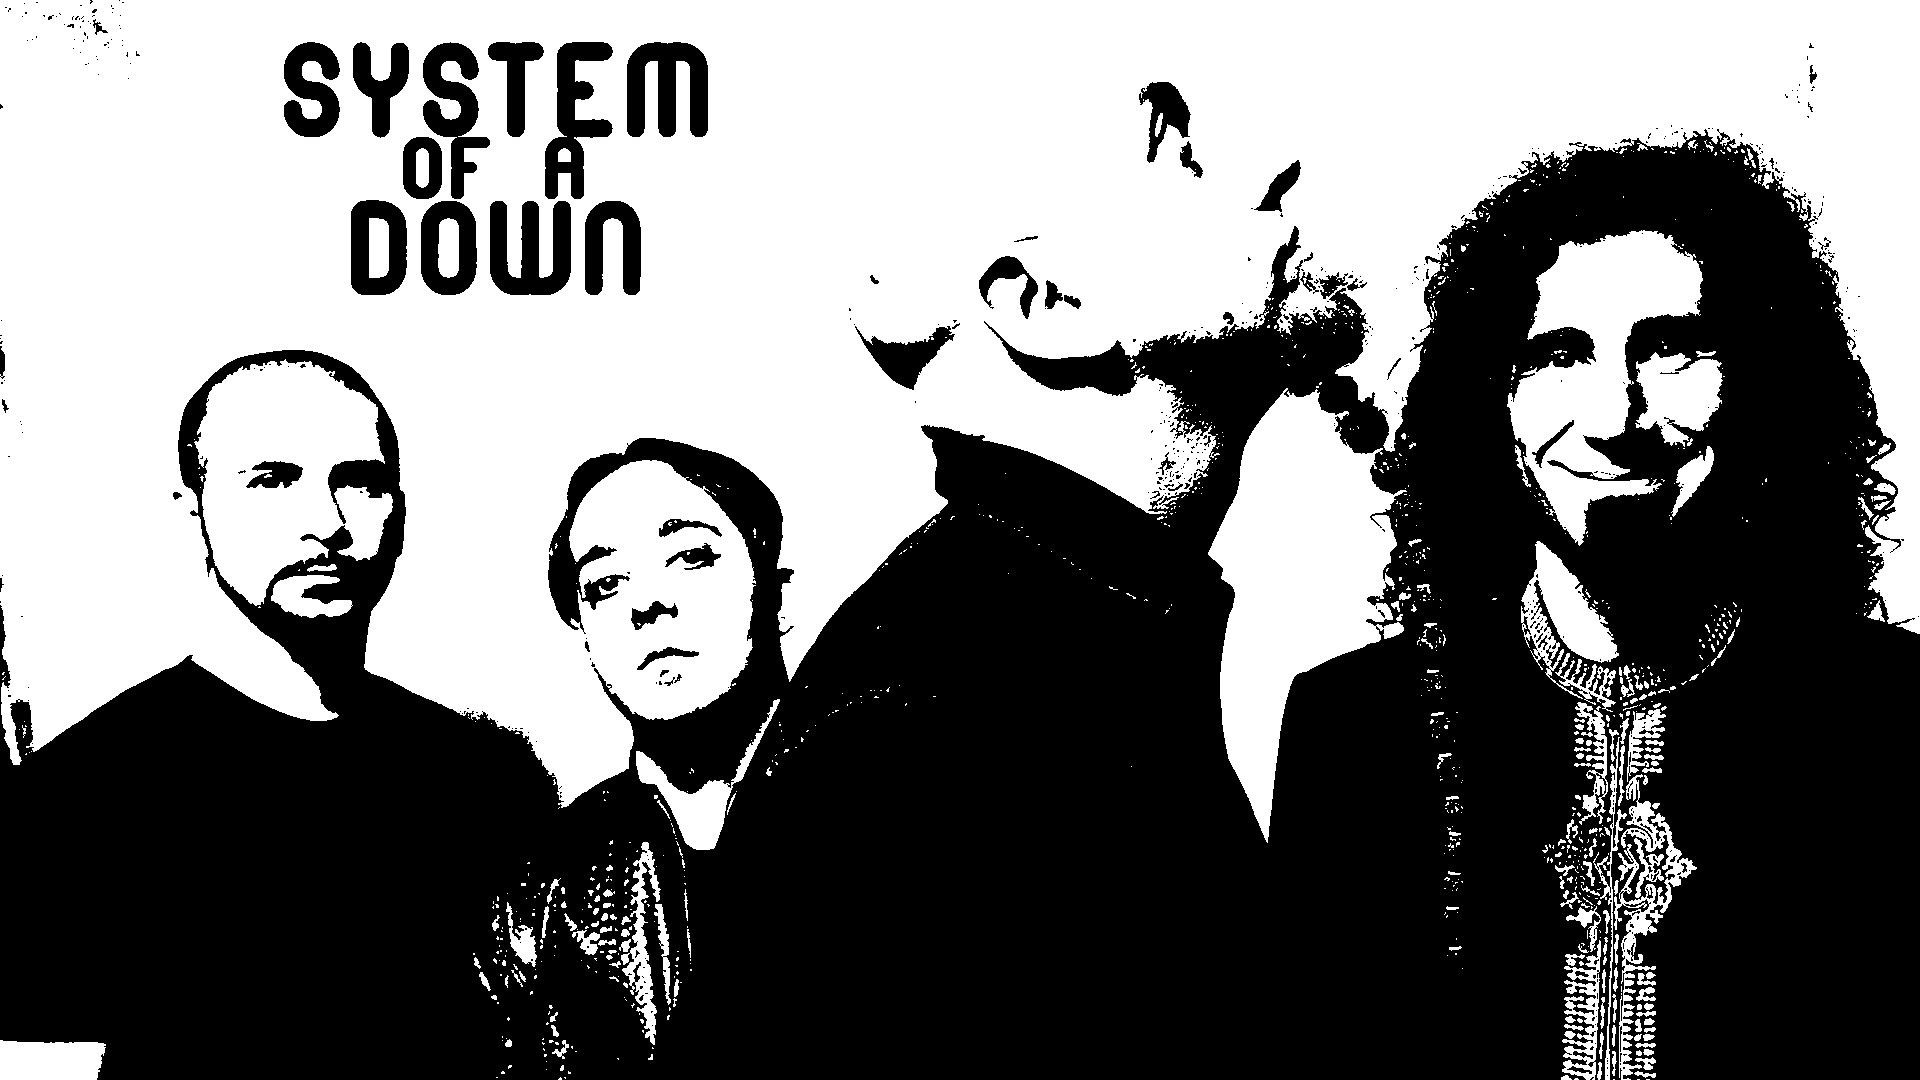 System of a down википедия. Постер группы System of a down. System of a down логотип группы. Группа System of a down плакат. System of a down 2001.